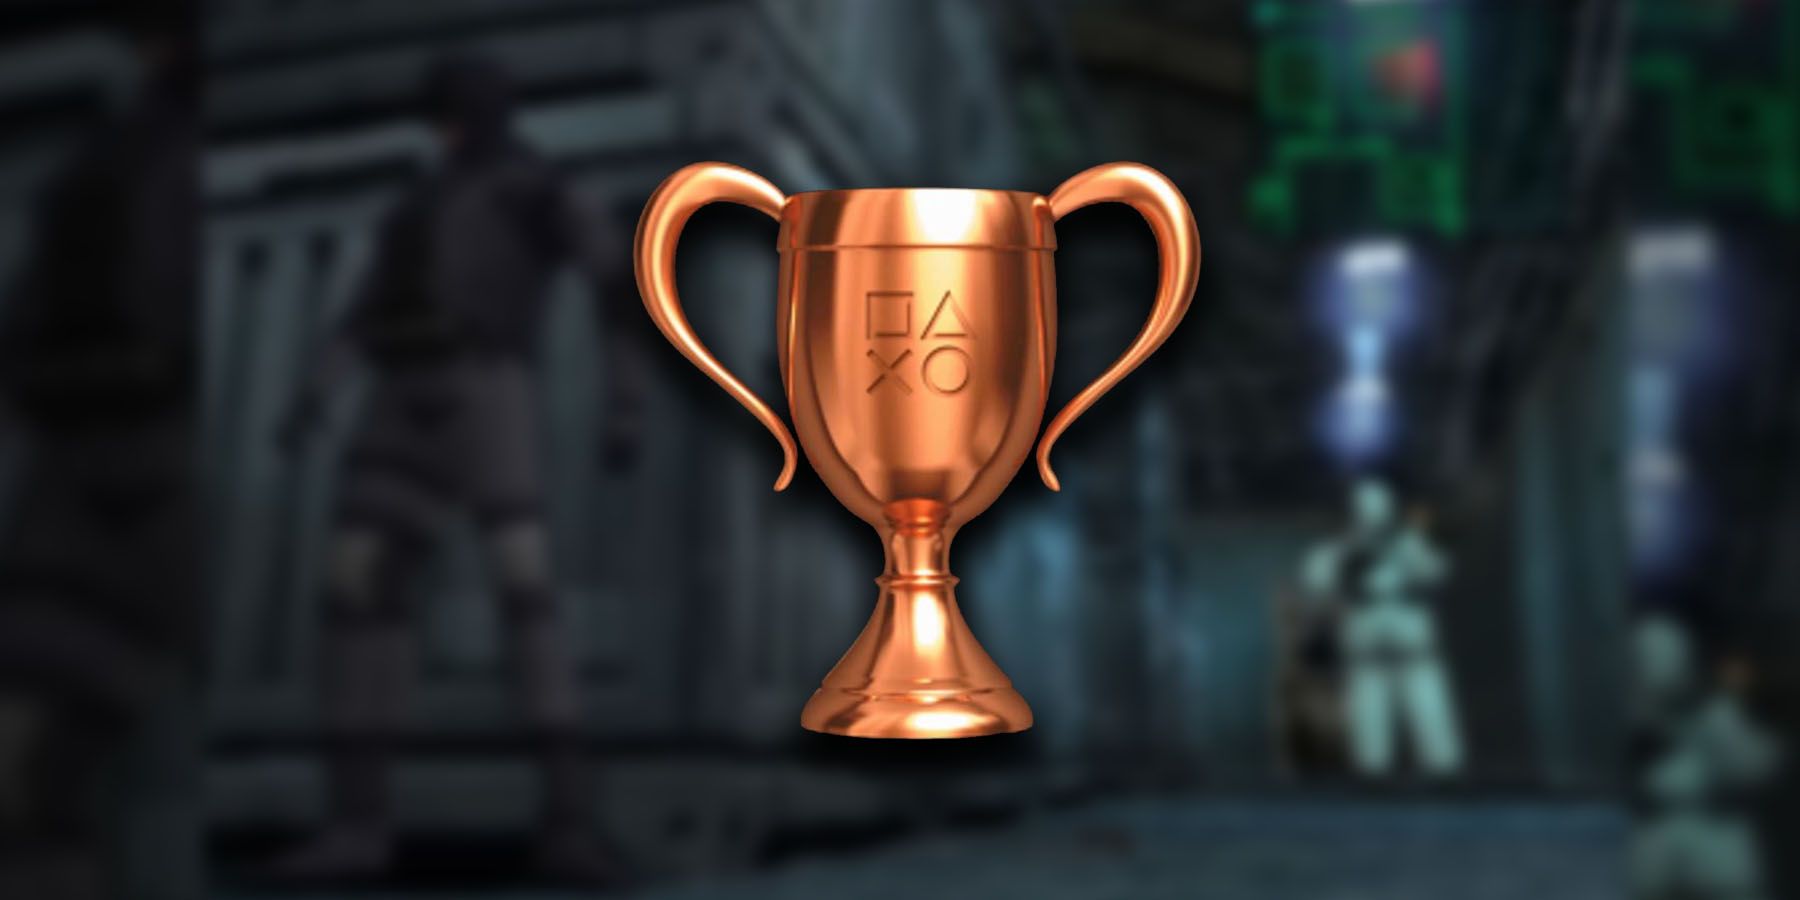 MGS Remastered Trophy